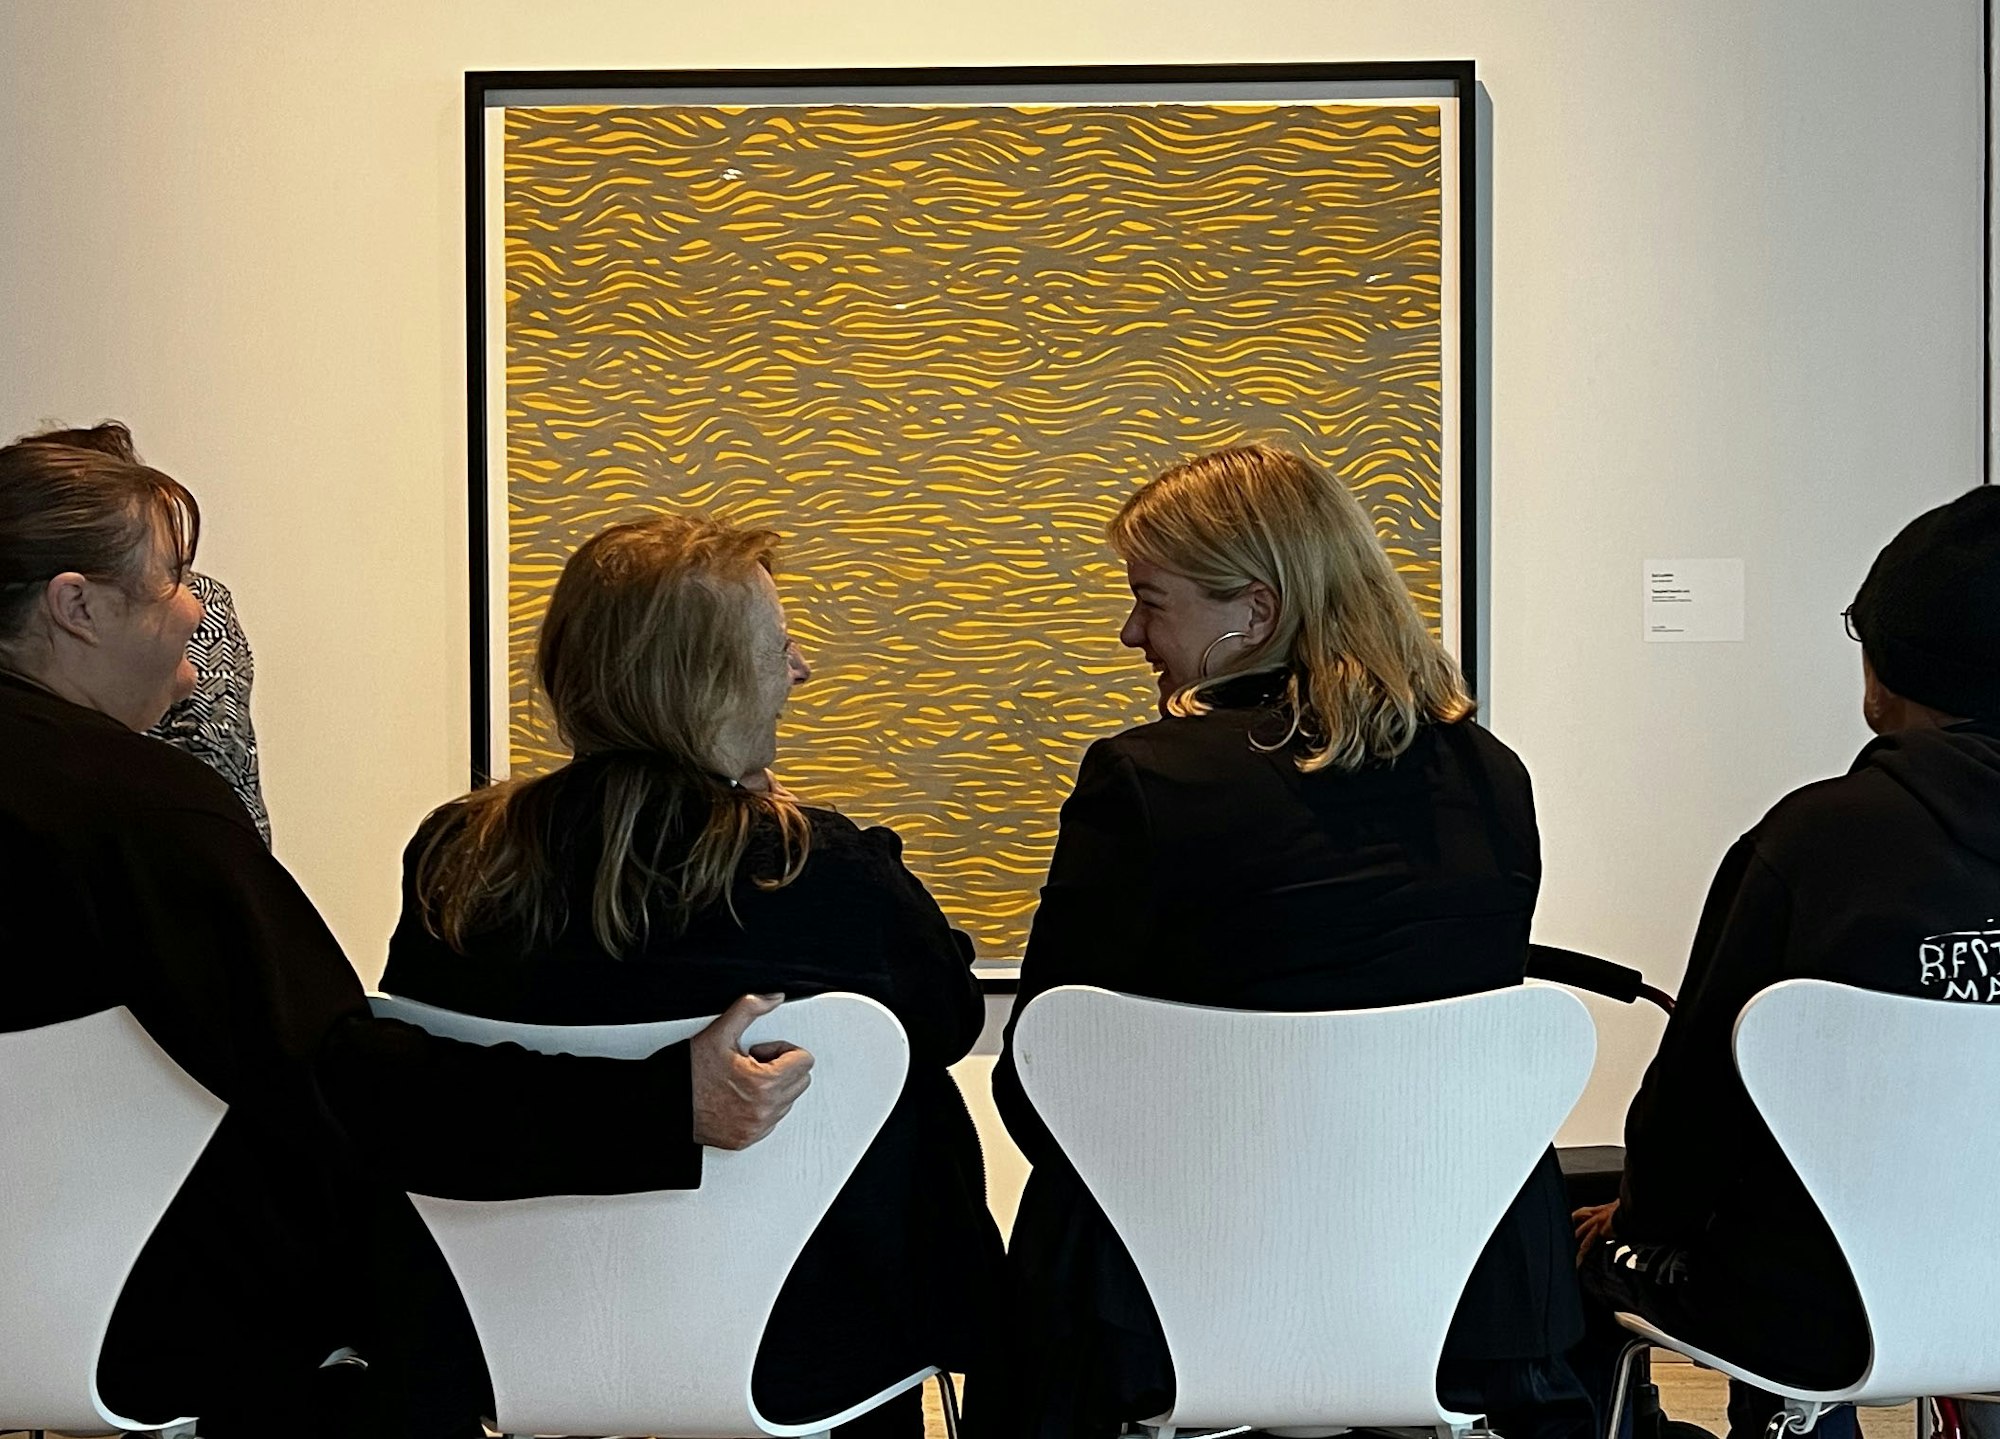 People sit on chairs in front of a framed artwork on a wall